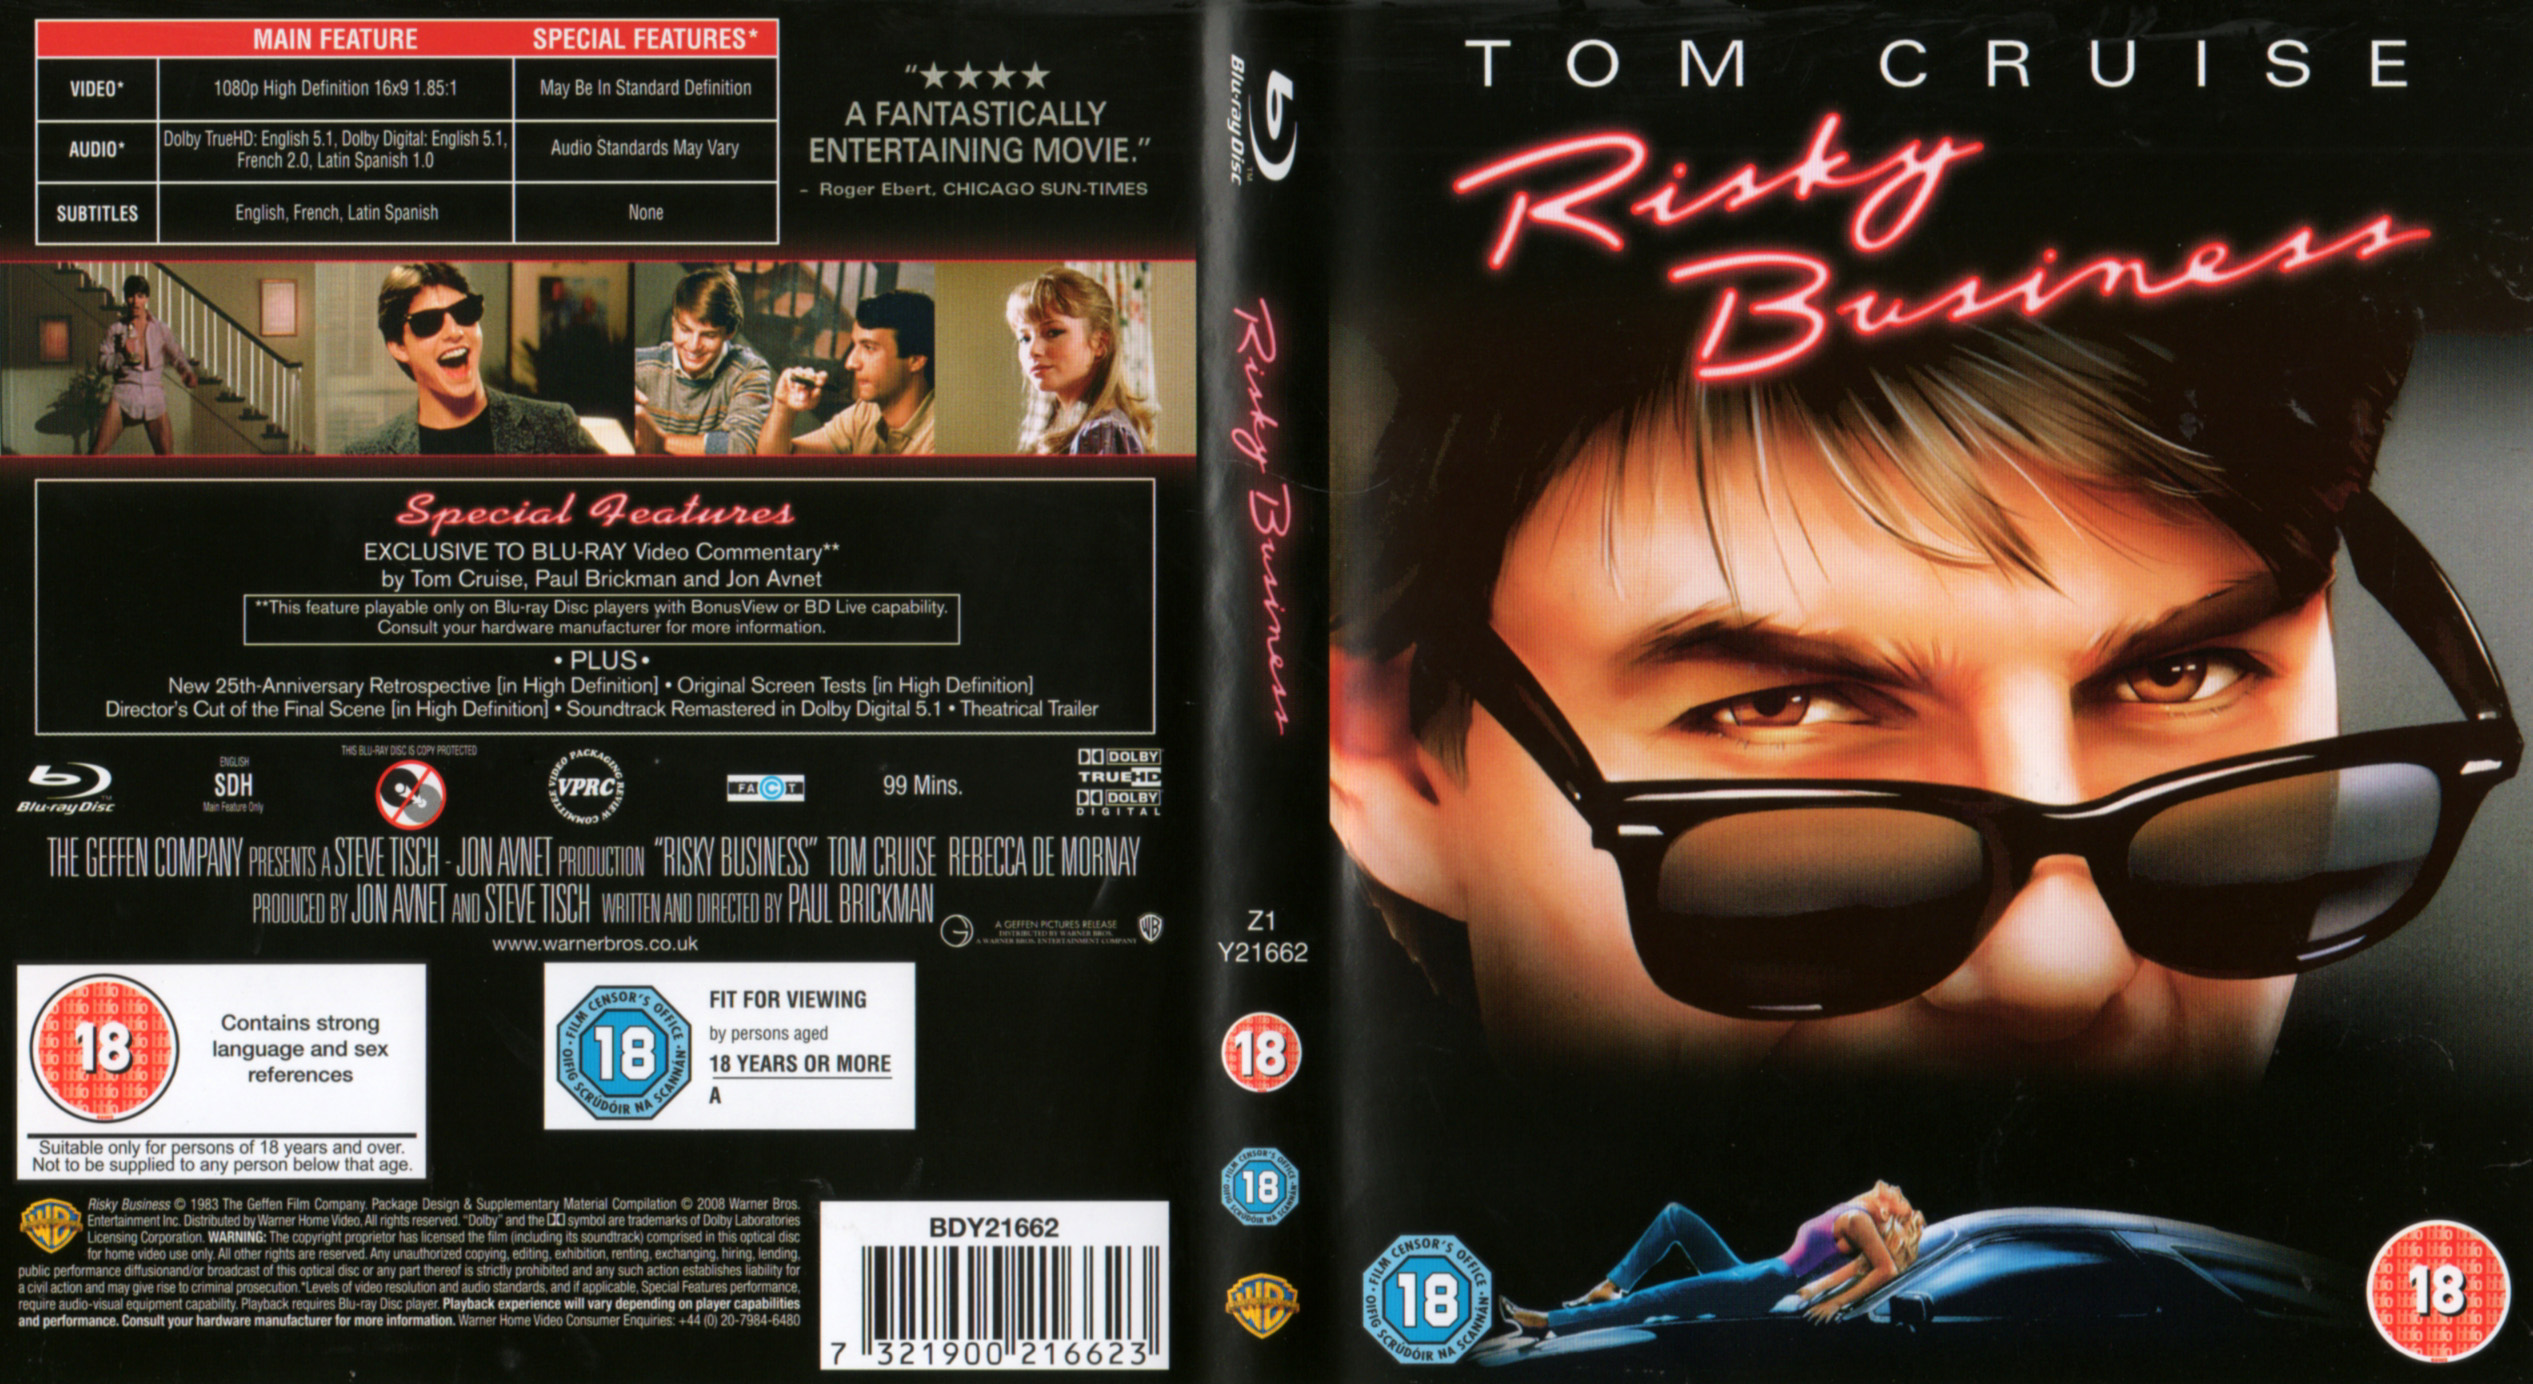 Jaquette DVD Risky business Zone 1 (BLU-RAY)